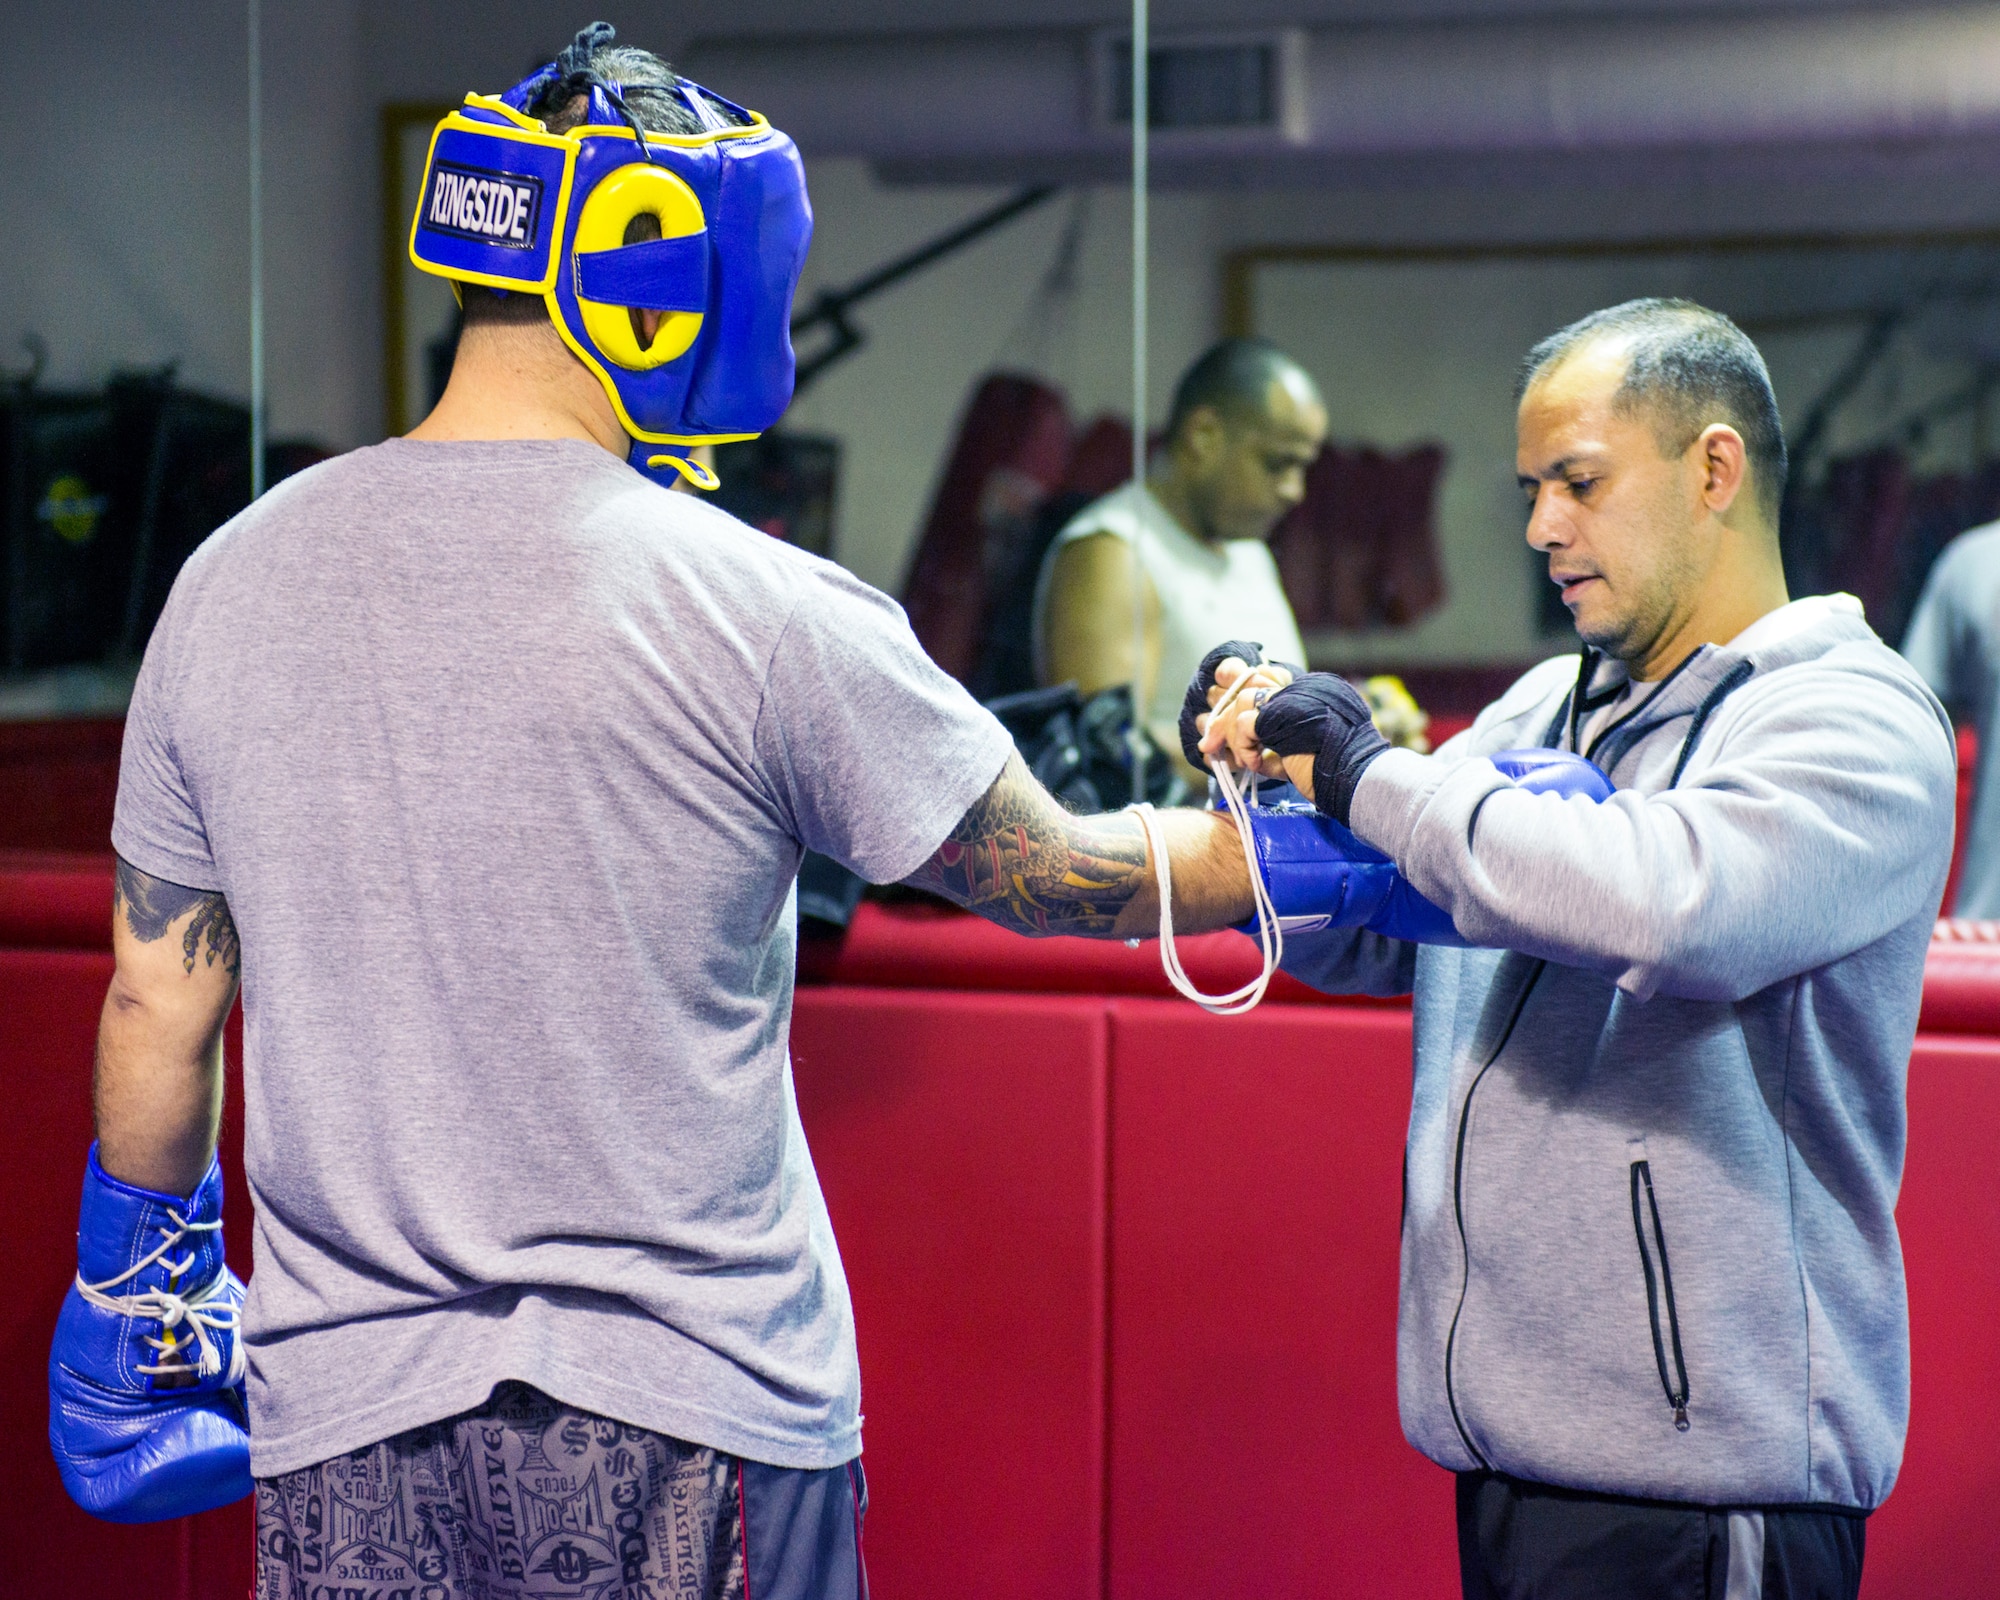 U.S. Air Force Capt. Eduardo Torrez, 60th Medical Operations Squadron, conducts a training session at the fitness center, Travis Air Force Base, Calif., Mar. 5, 2017. Torrez is a nurse at David Grant USAF Medical Center and was an amateur boxer before joining the Air Force. (U.S. Air Force photo/Louis Briscese)